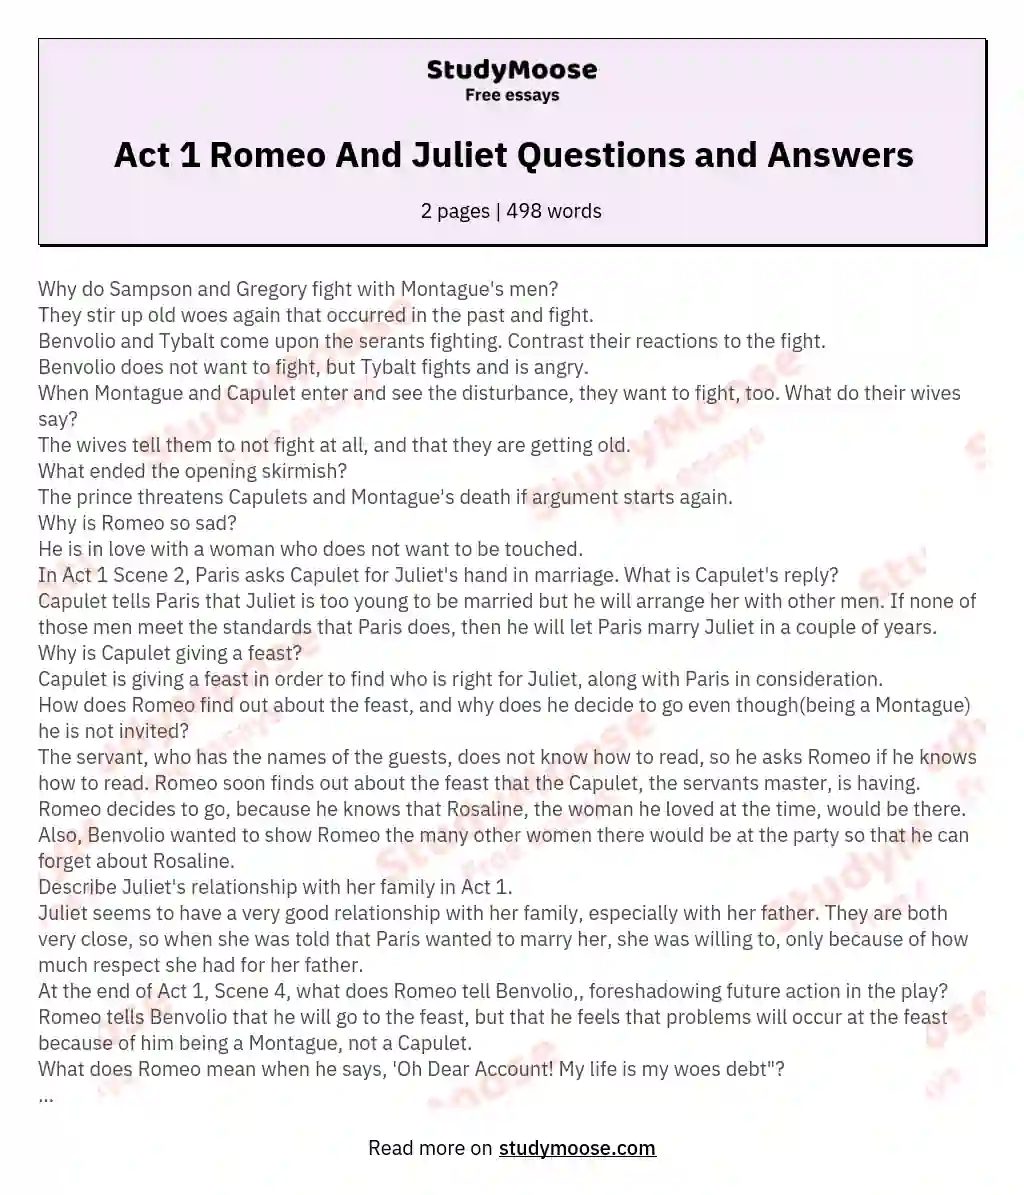 Act 1 Romeo And Juliet Questions and Answers